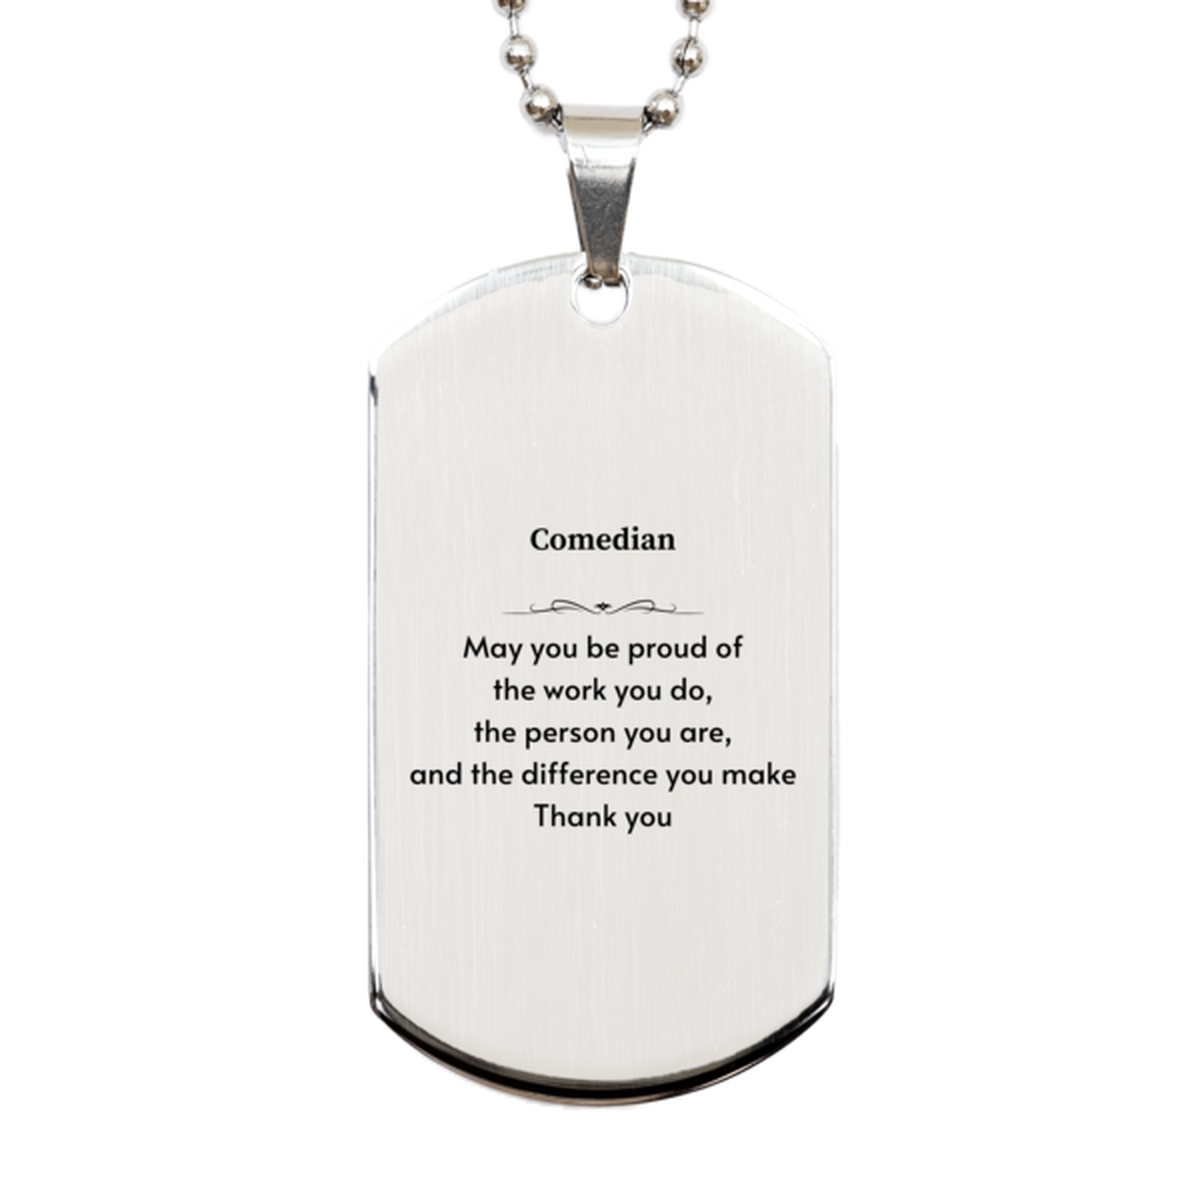 Heartwarming Silver Dog Tag Retirement Coworkers Gifts for Comedian, Comedian May You be proud of the work you do, the person you are Gifts for Boss Men Women Friends